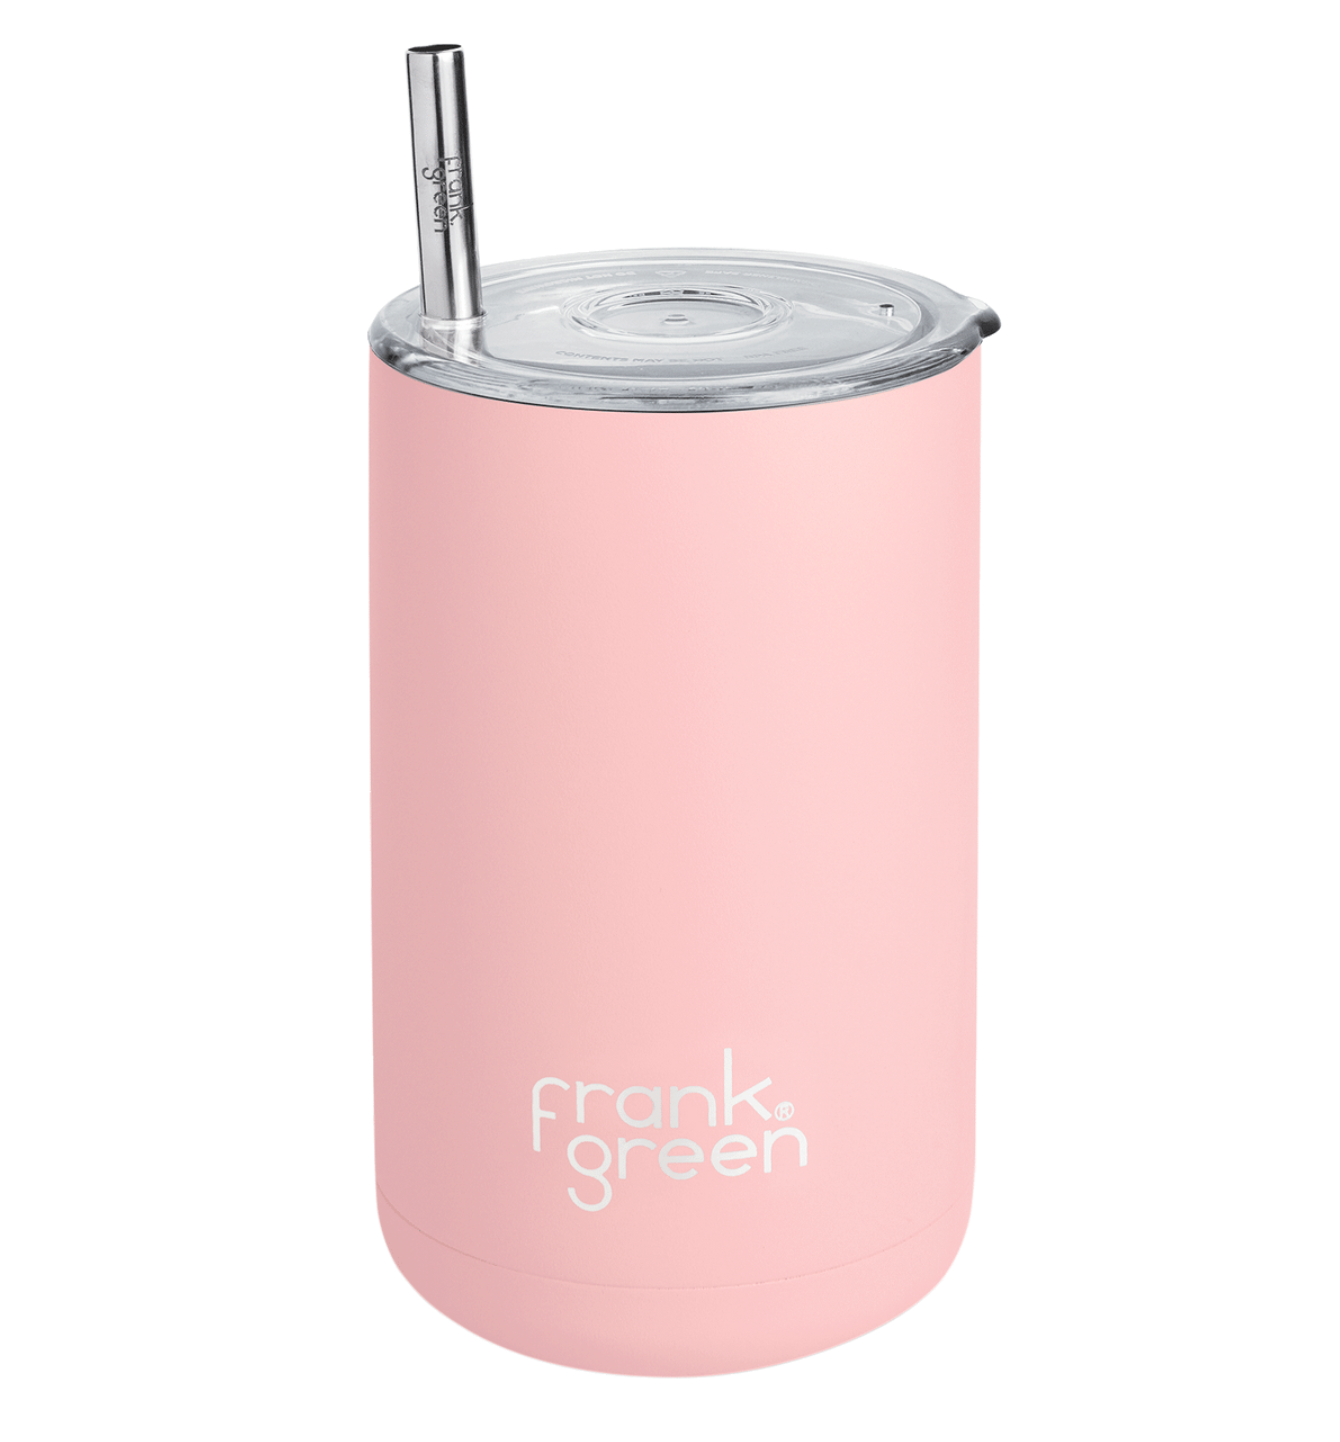 Frank Green 3-in-1 Insulated Reusable Drink Holder 150z (425ml), Blushed